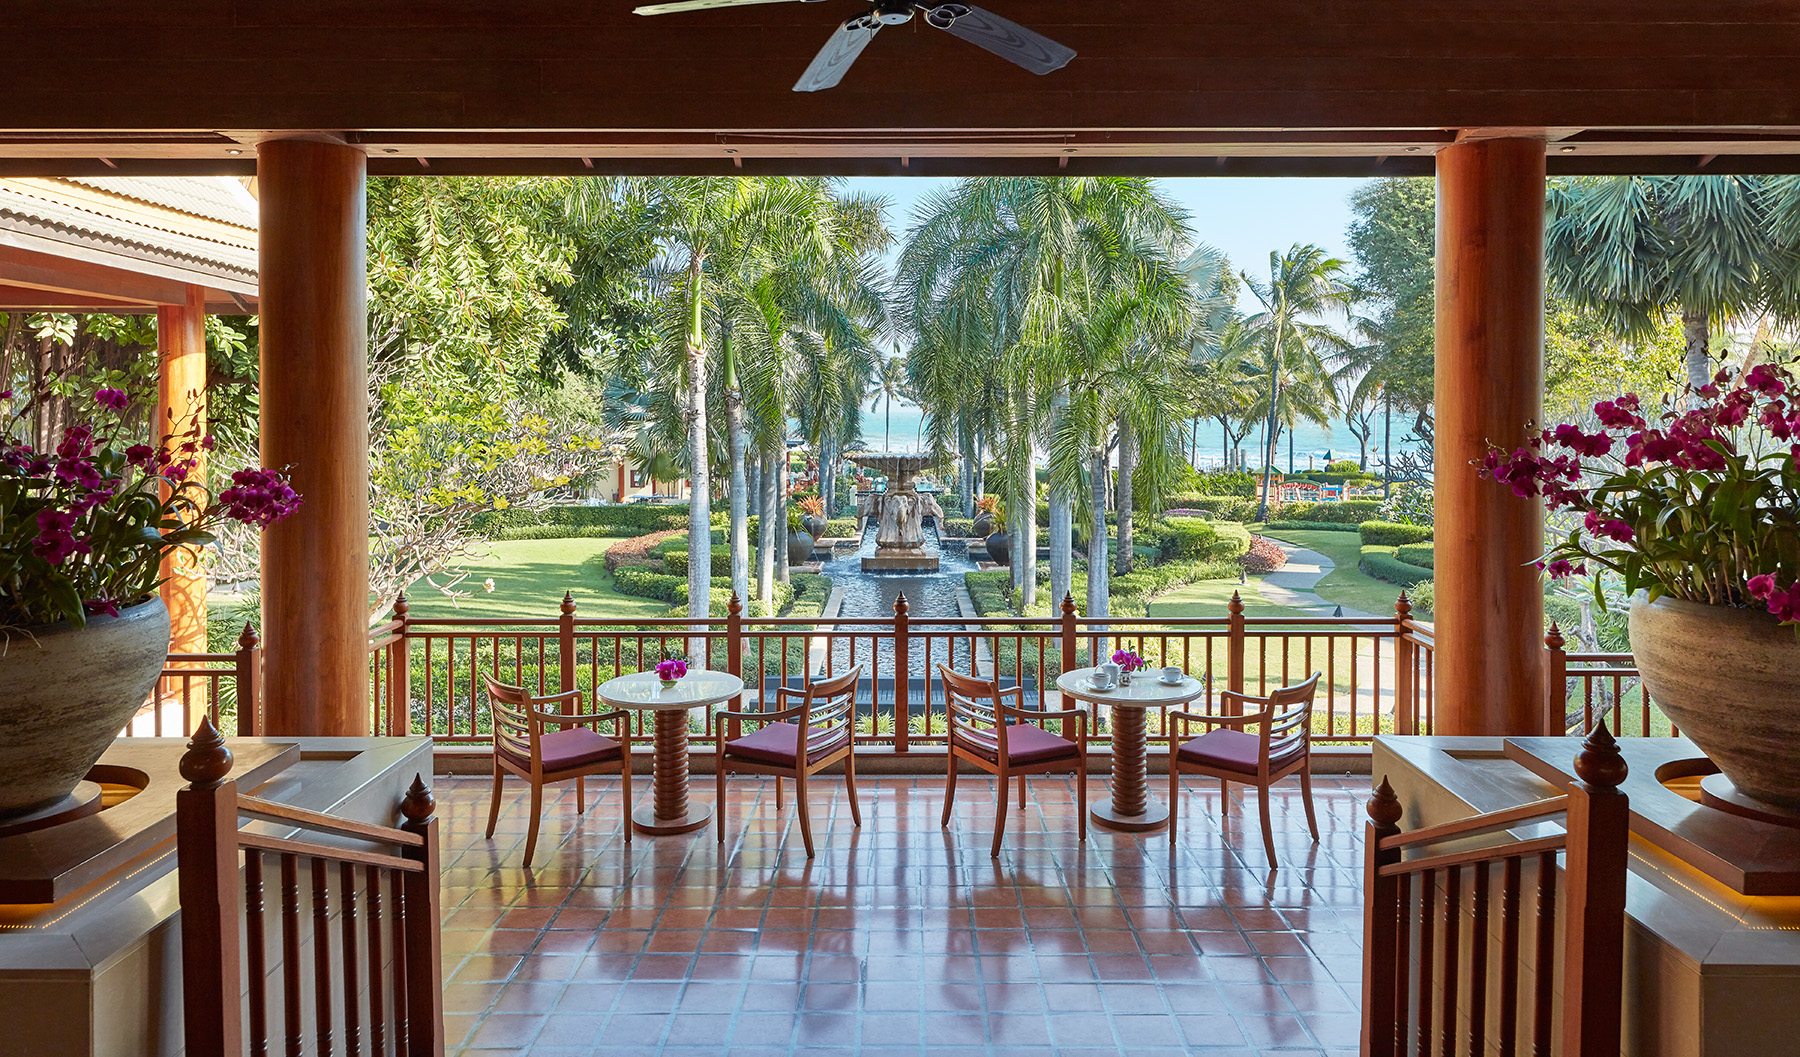 Hyatt Regency Hua Hin and THE BARAI is caring for your wellbeing